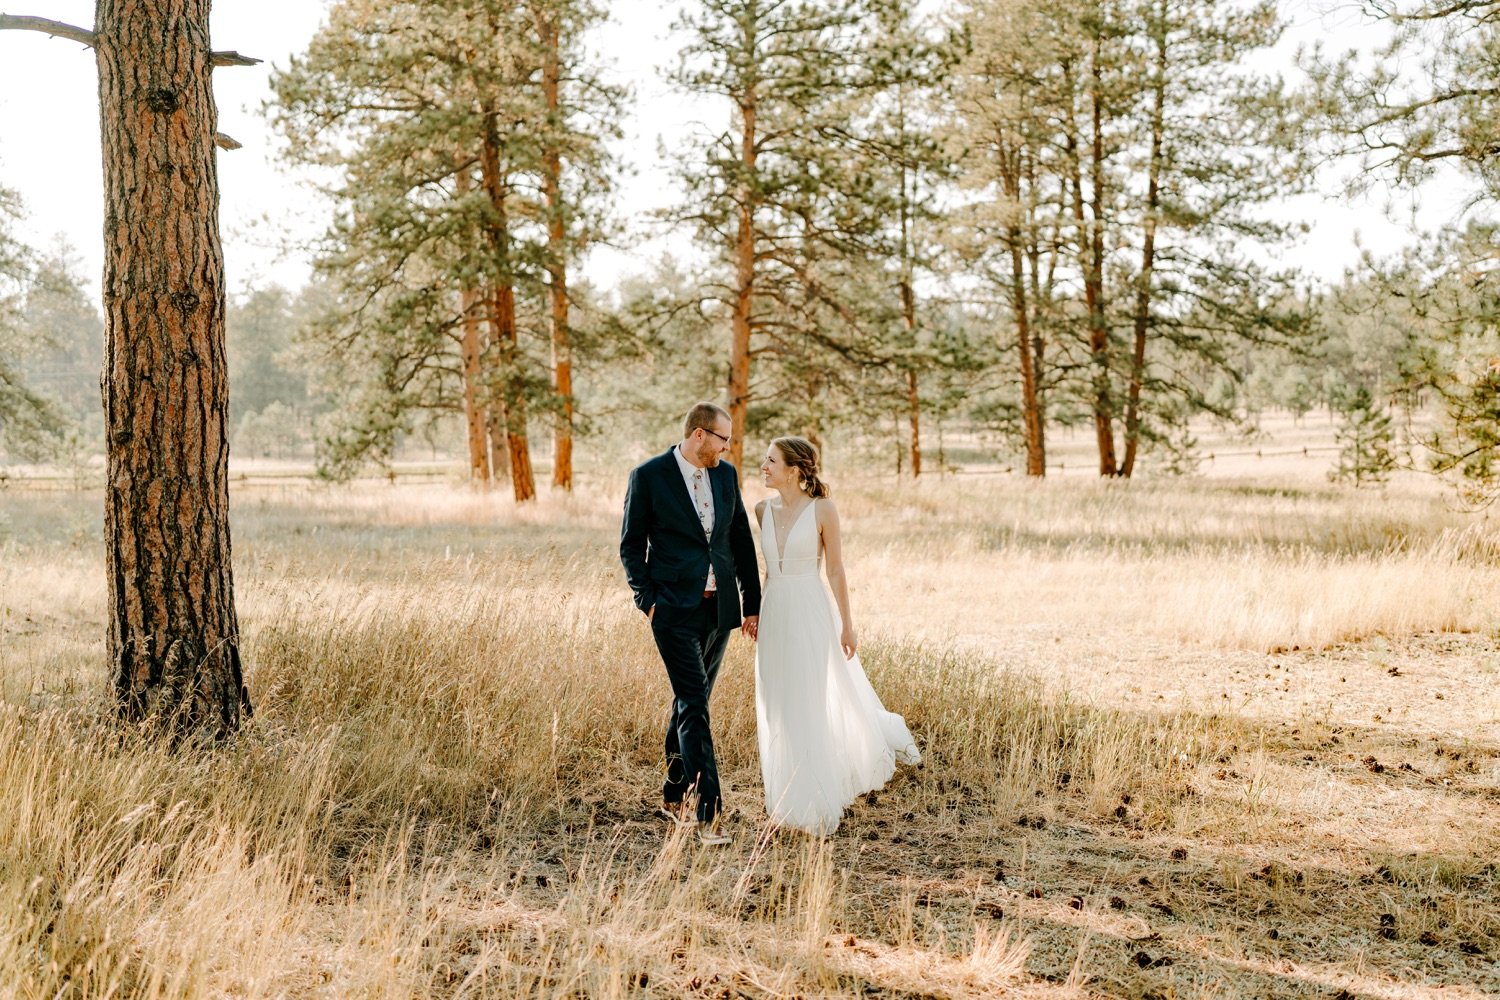 Tom's Travels Photo | Colorado Elopement and Wedding Photographer